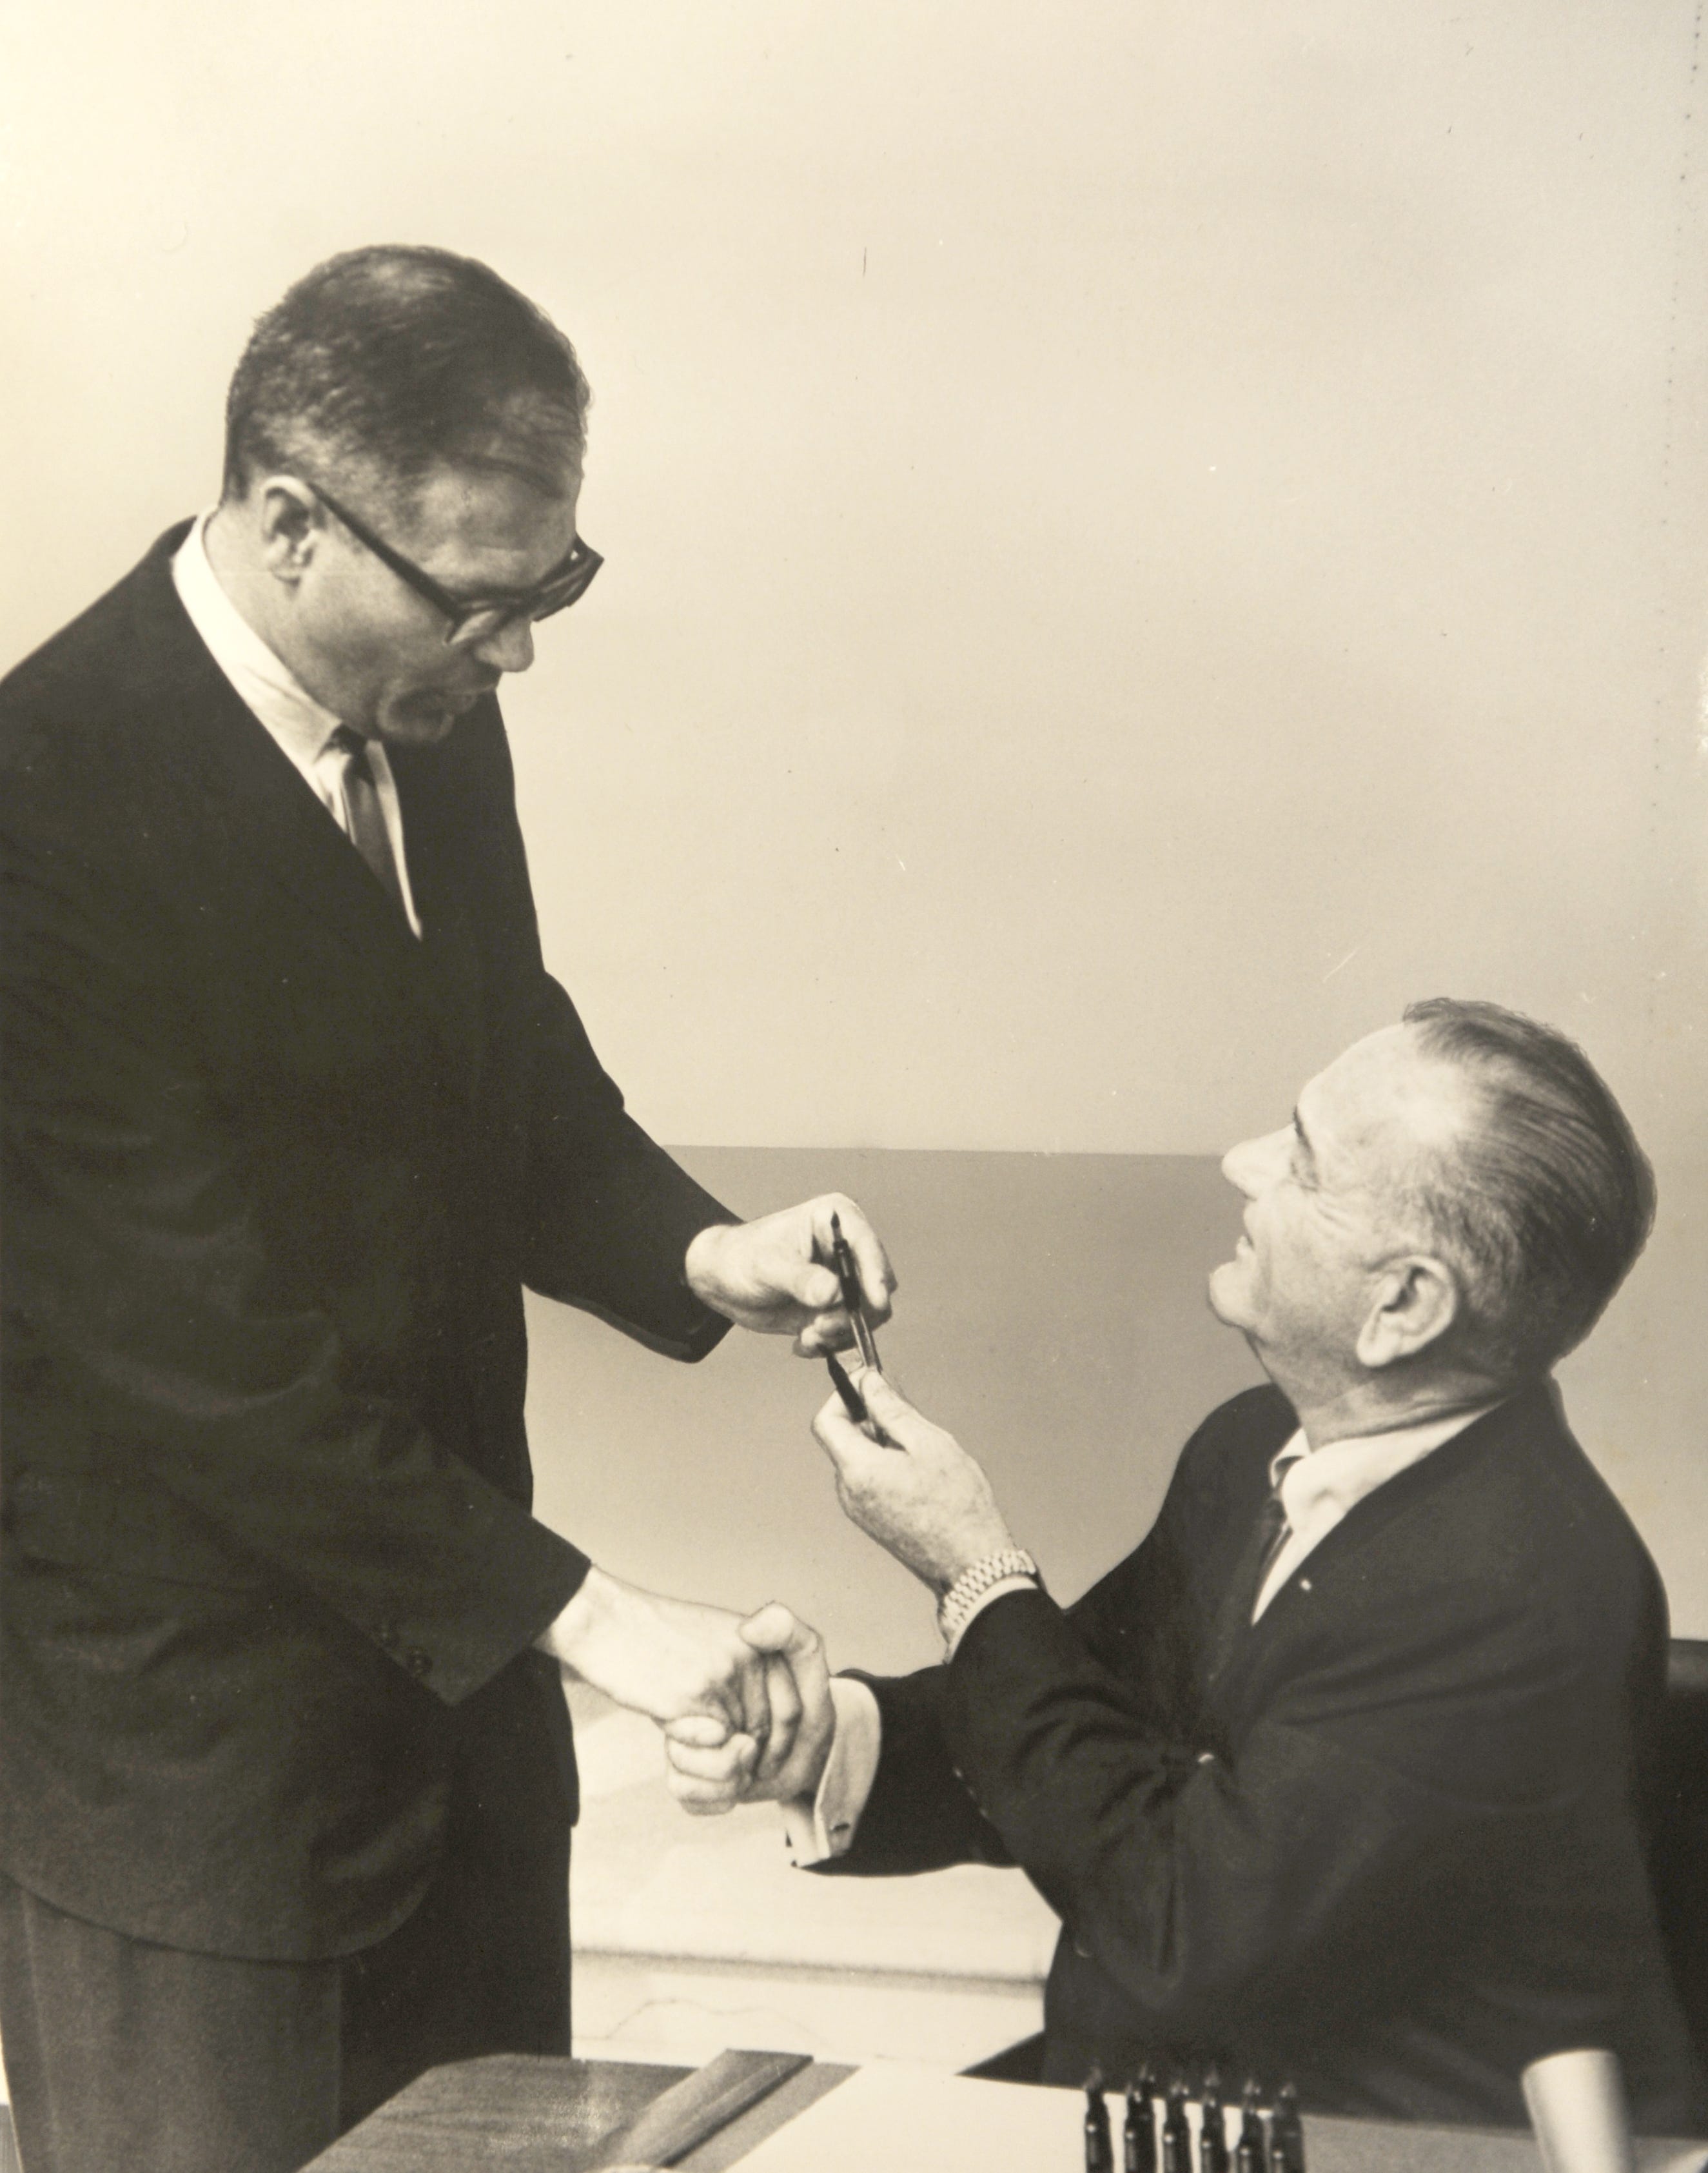 Dingell kept a personal and professional photo archive in his office, including this photo of President Lyndon Johnson handing him a pen after signing a bill.